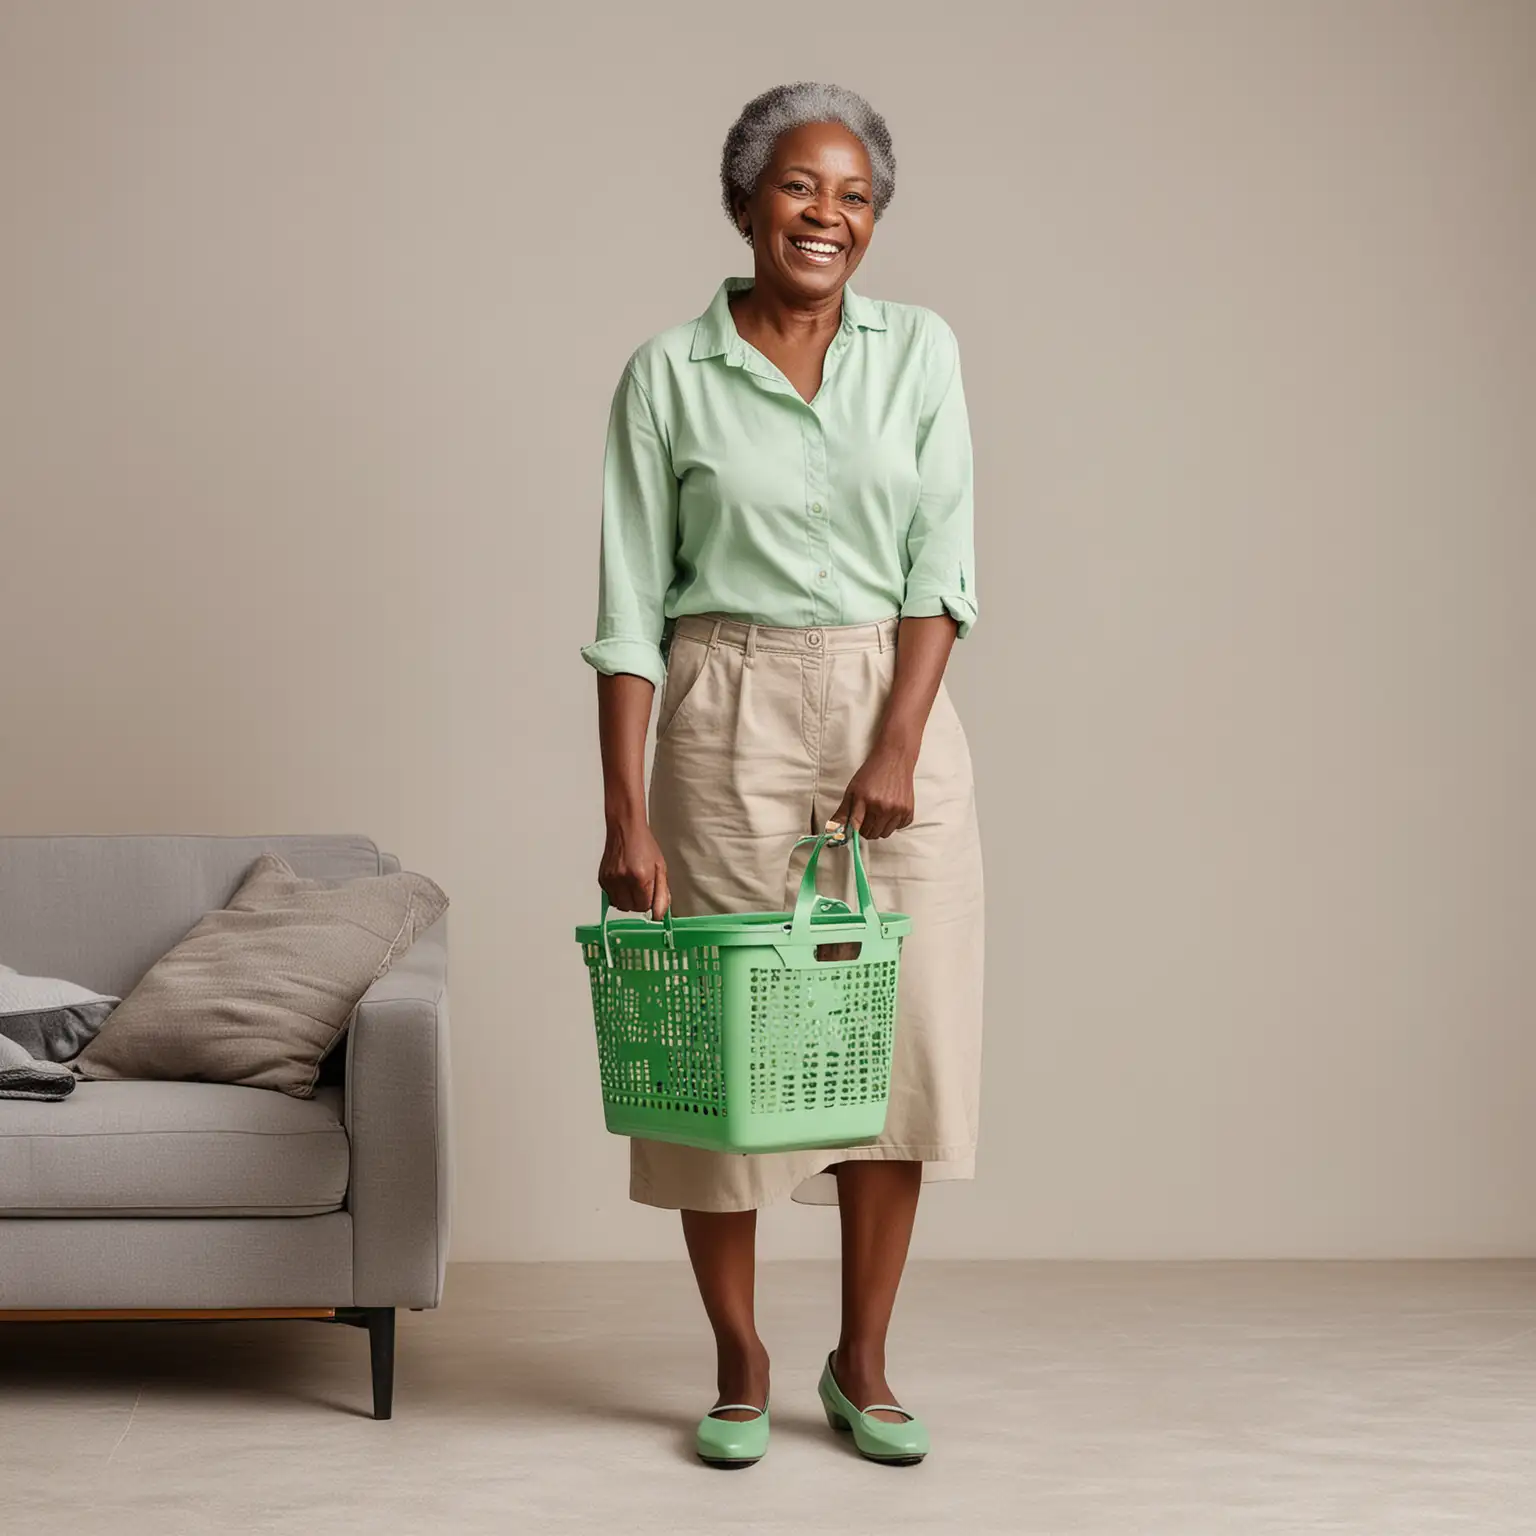 Joyful African Grandmother with Laundry Basket in Casual Attire